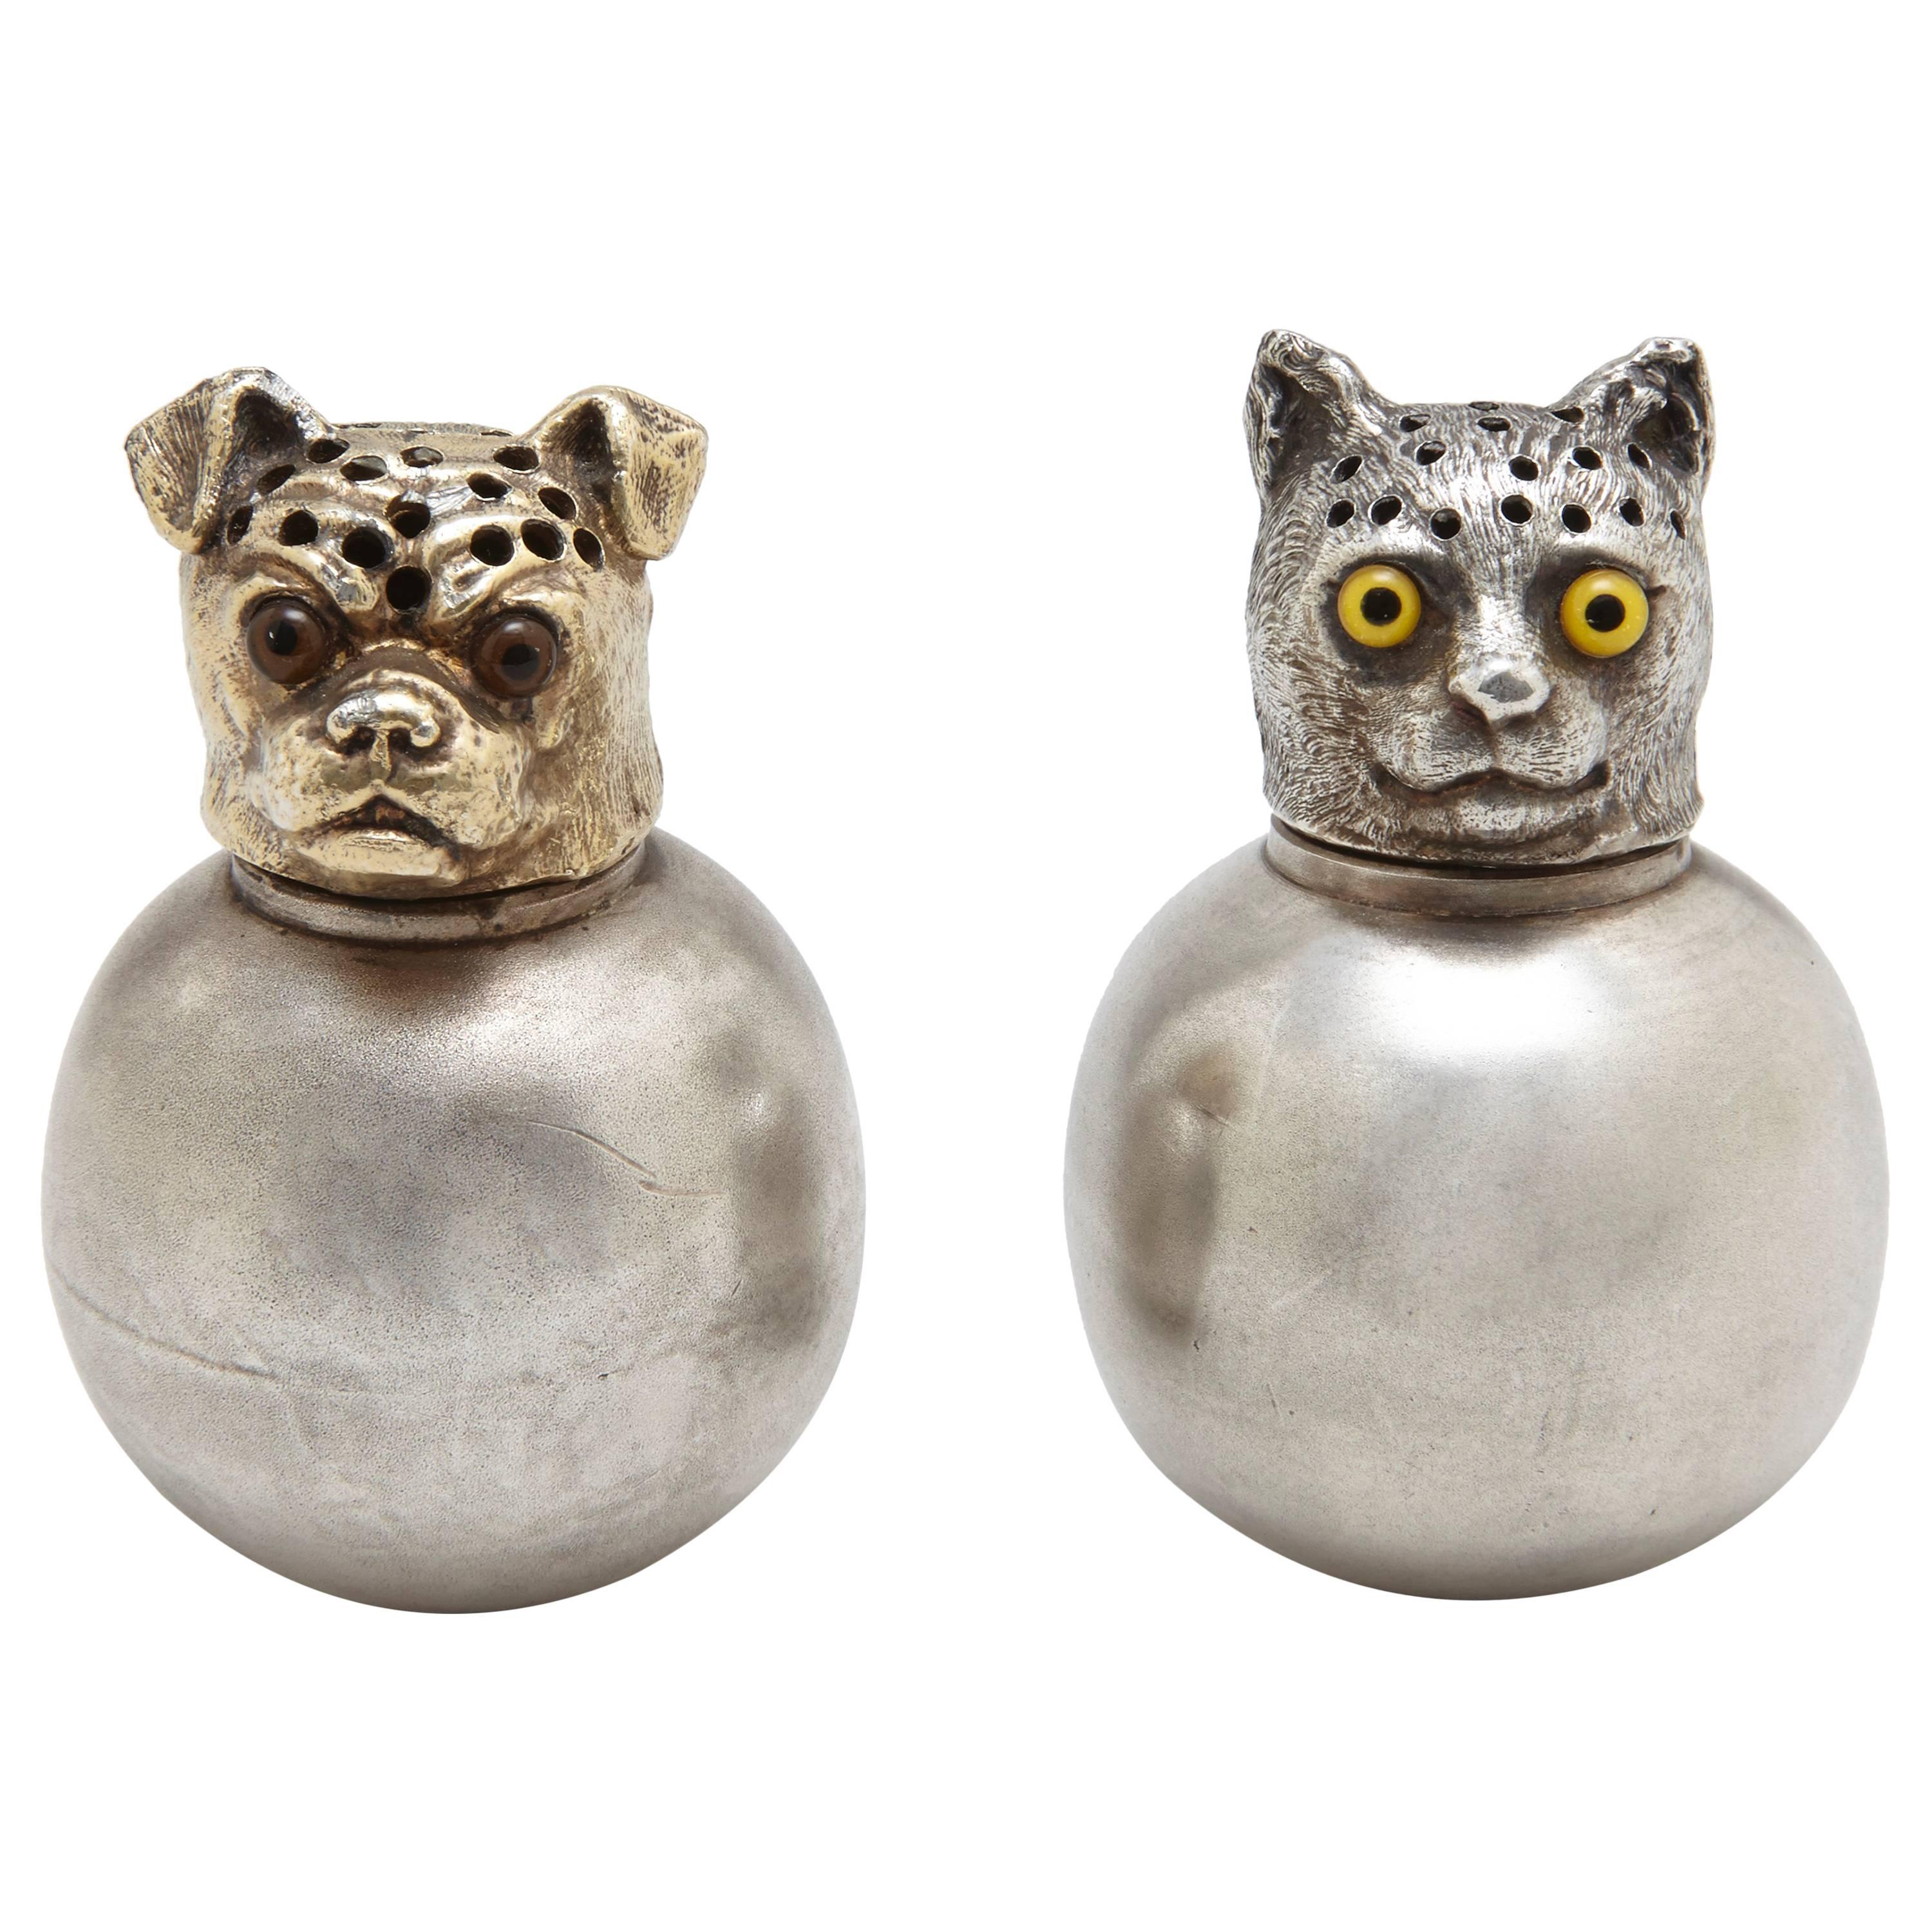 Cat and Dog Salt and Pepper Shakers